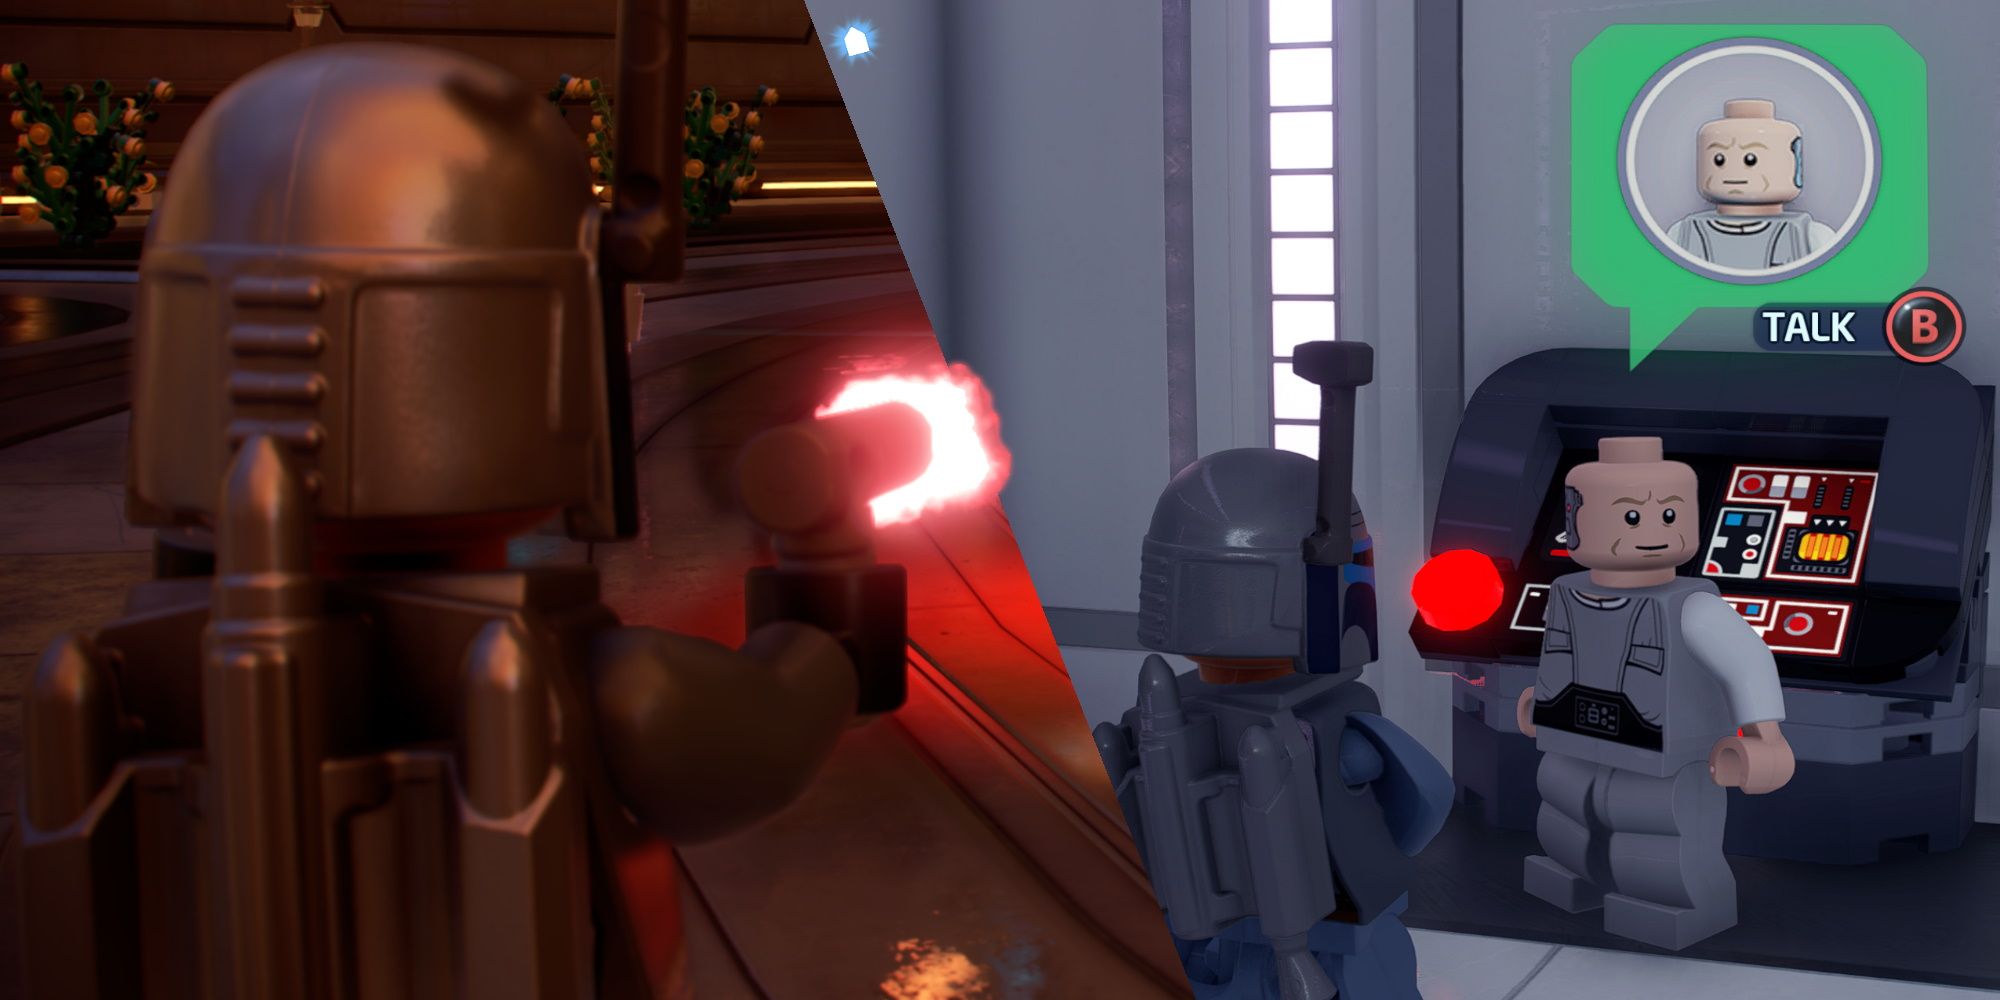 Split image of Jango Fett firing while in Cloud City and of Lobot giving a mission